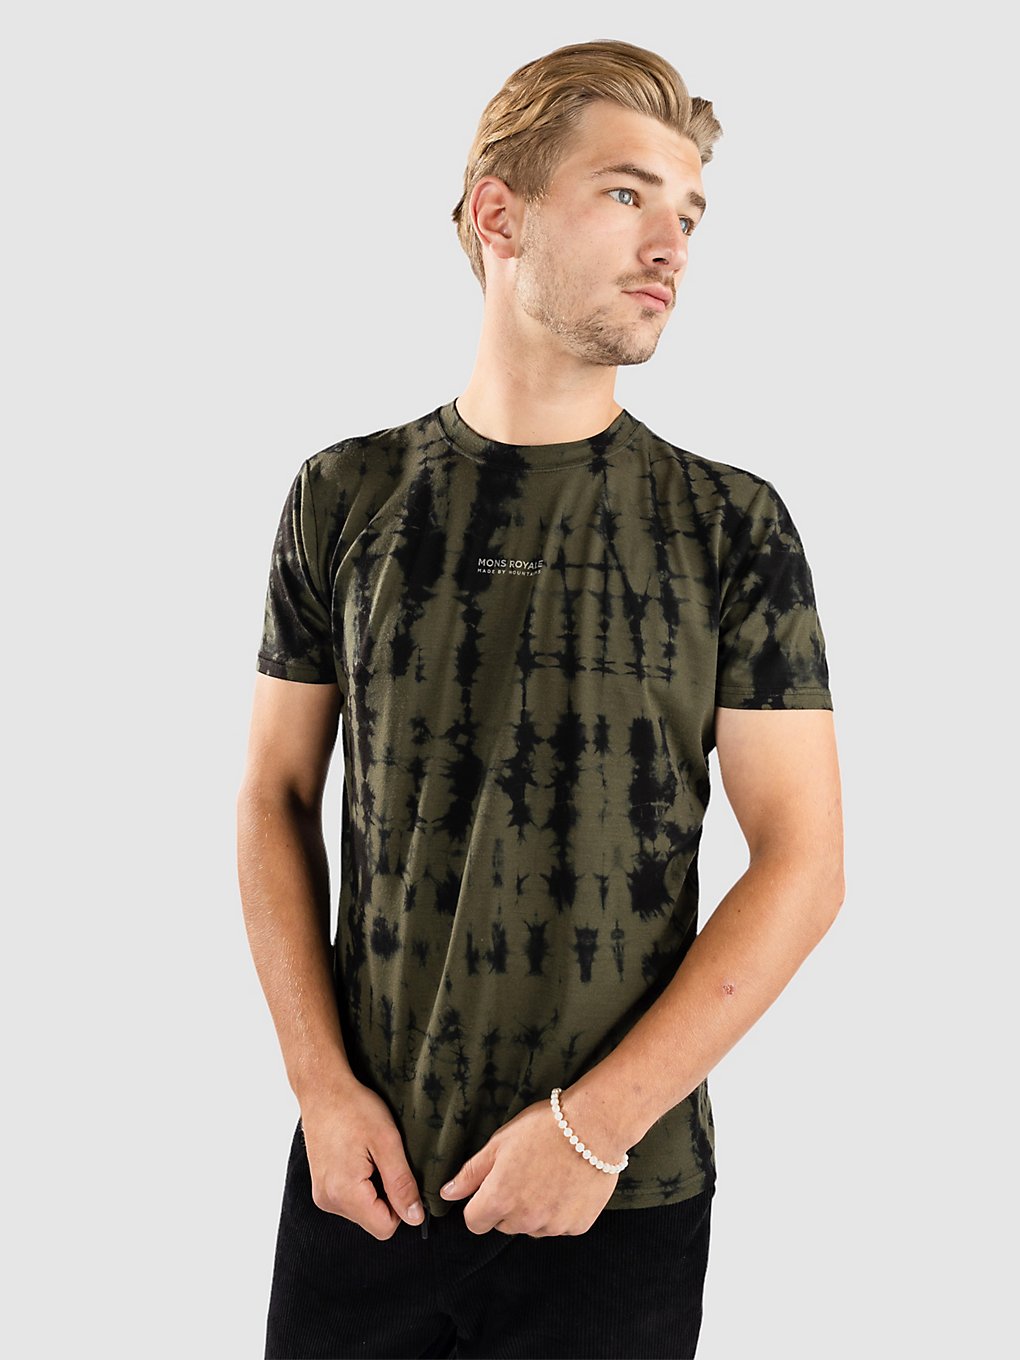 Mons Royale Merino Icon Tie Dyed Funktionsshirt olive tie dye kaufen